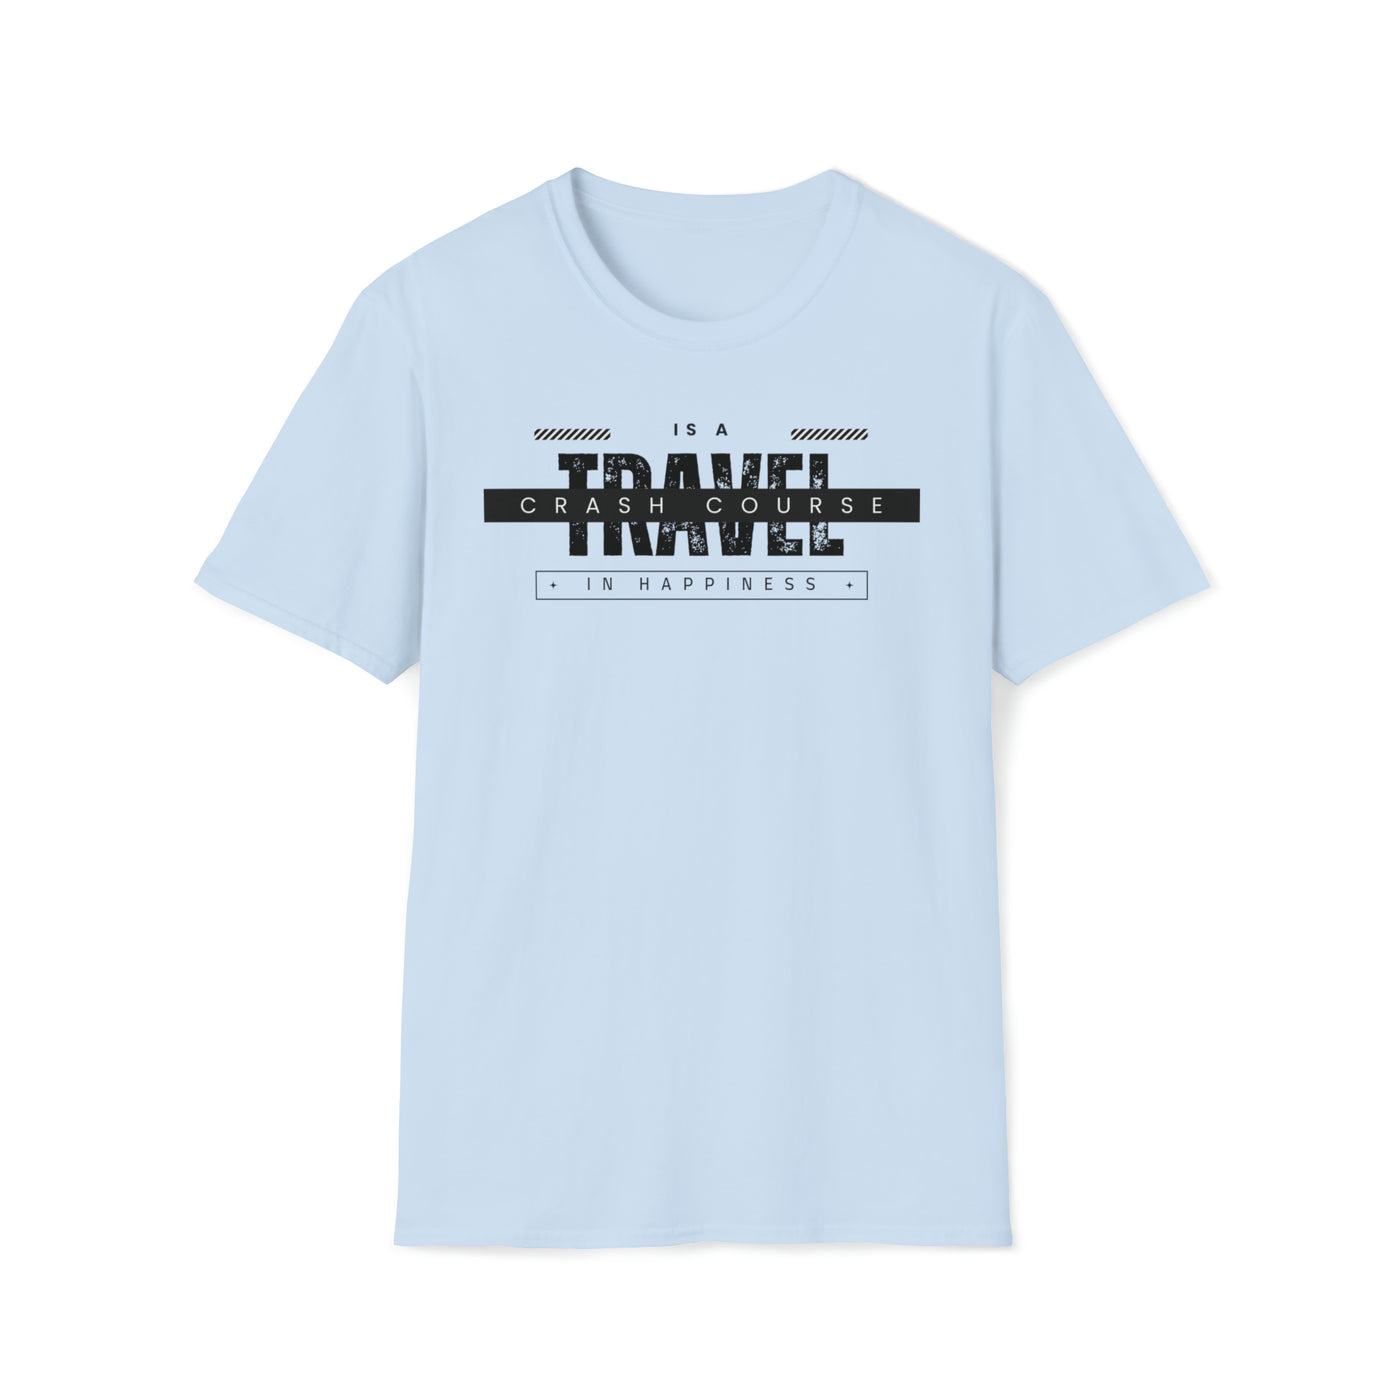 Travel is a crash course in happiness Unisex Soft-style T-Shirt